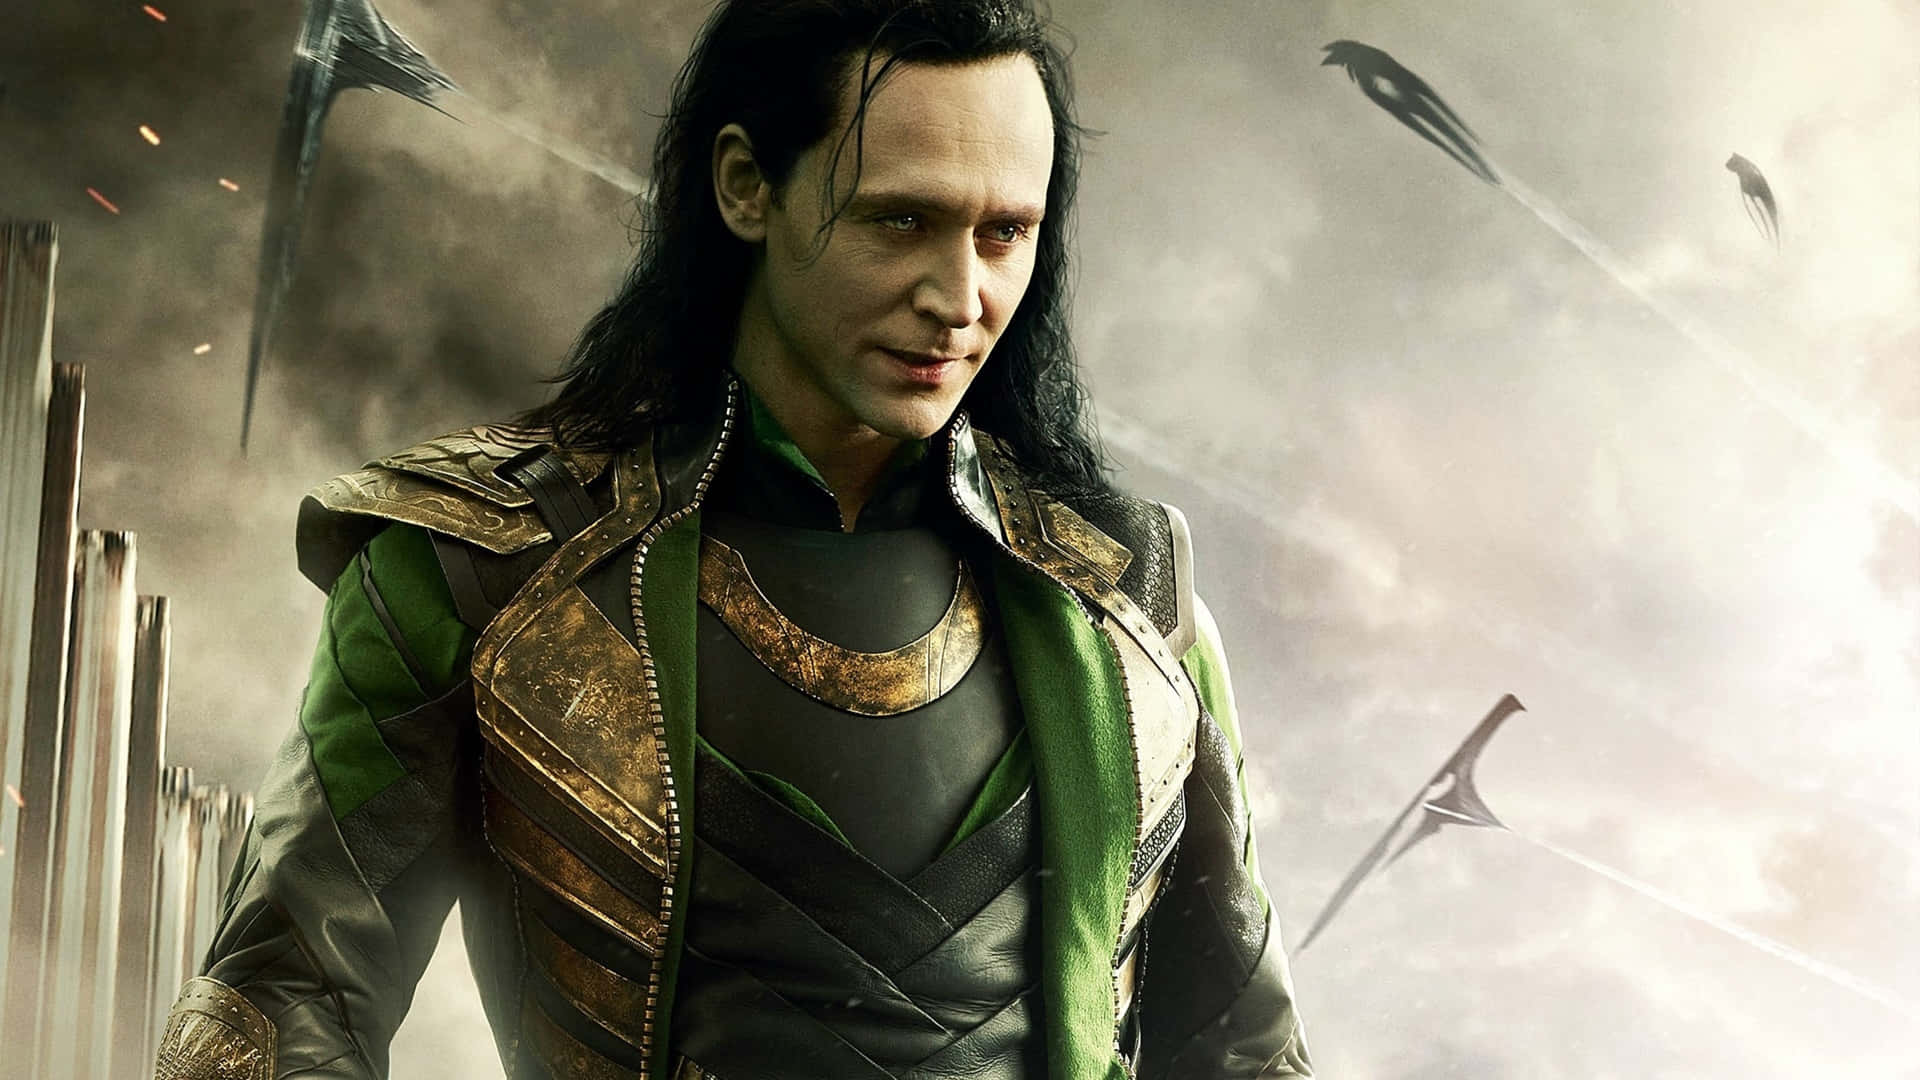 Image  Loki, the God of Mischief from the Marvel Universe Wallpaper